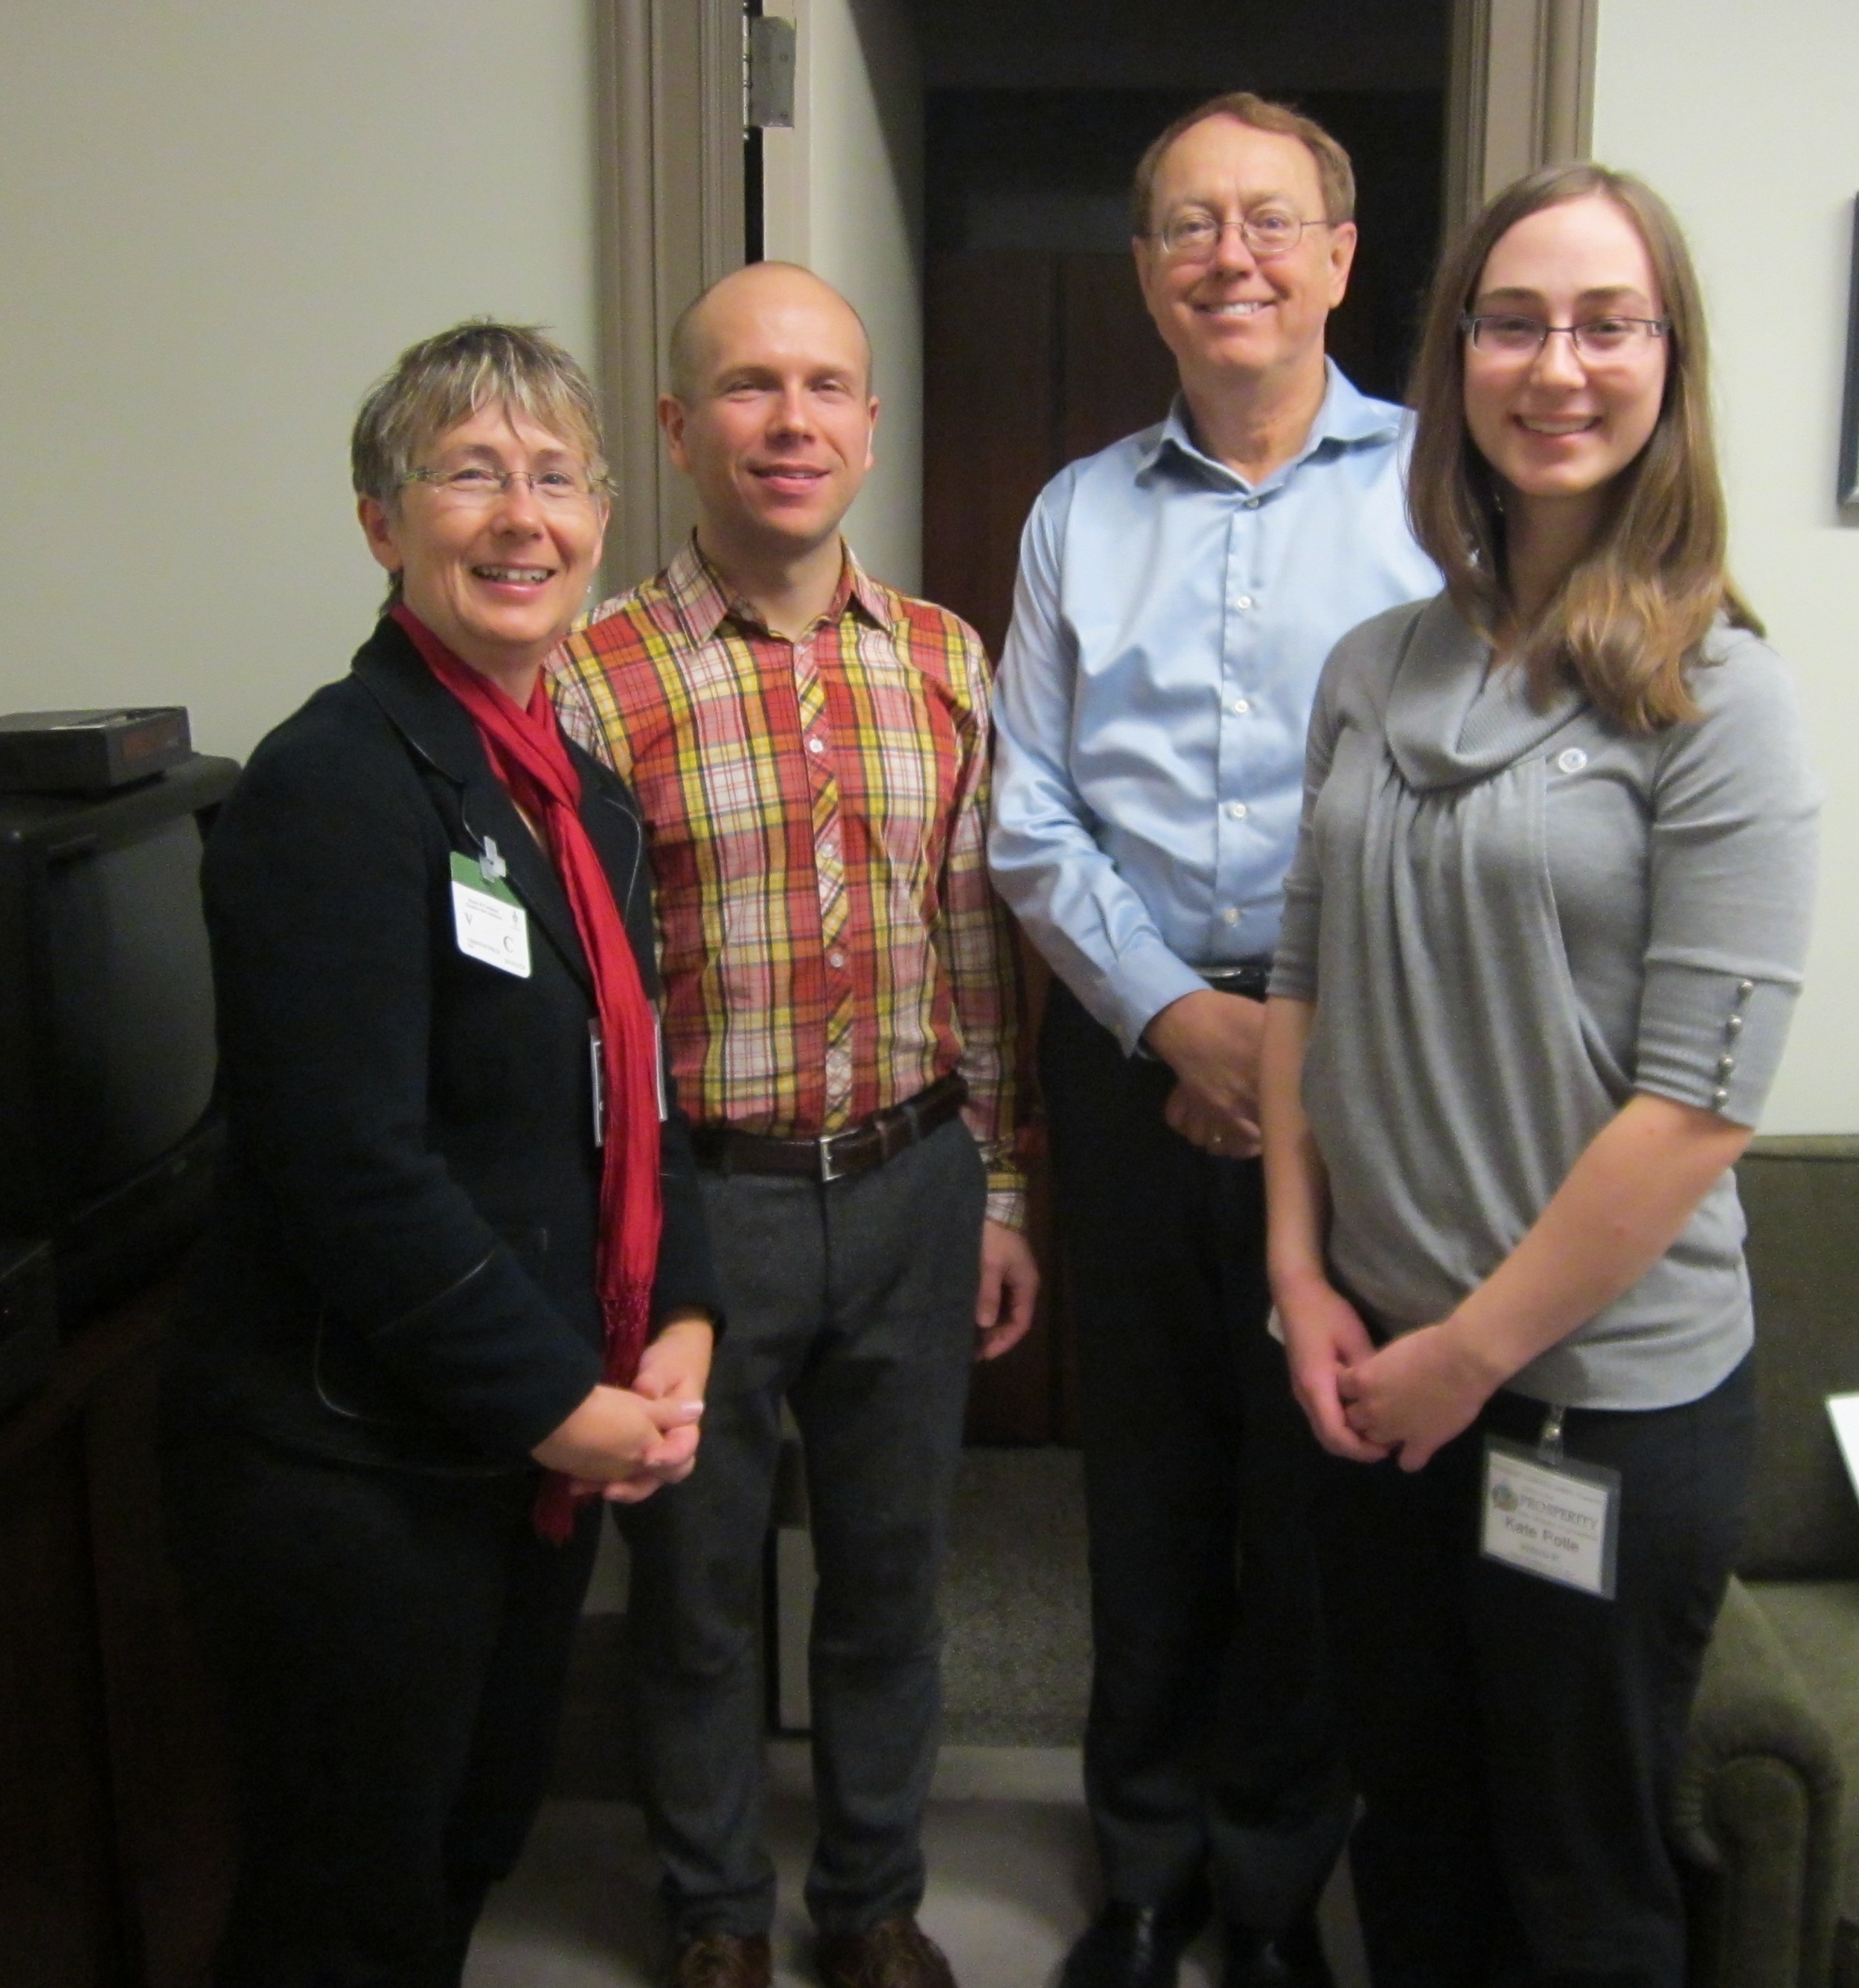 MP Murray Rankin from Victoria (second from right) met with a constituent and two other Citizens' Climate Lobbyists